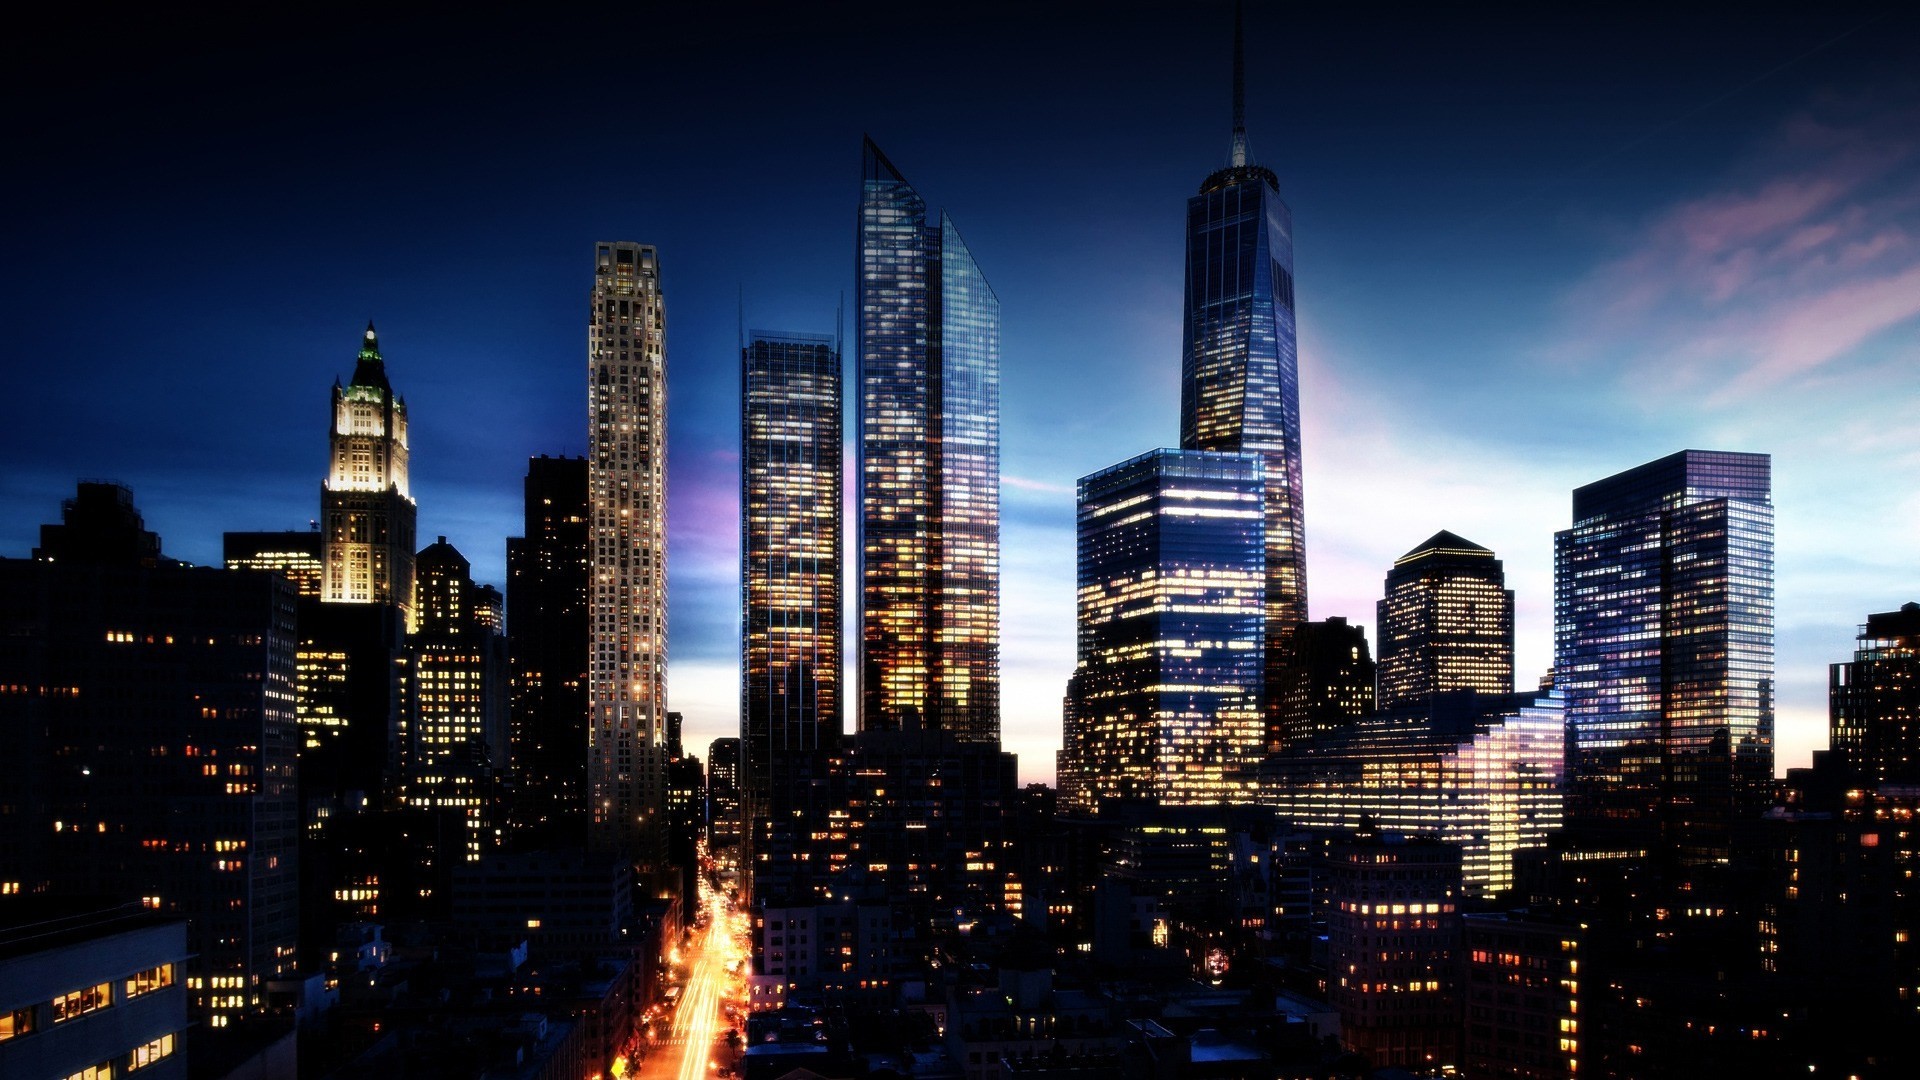 1920x1080 ... Above talking About picture parts of High Resolution New York Skyline  At Night Wallpaper HD 1